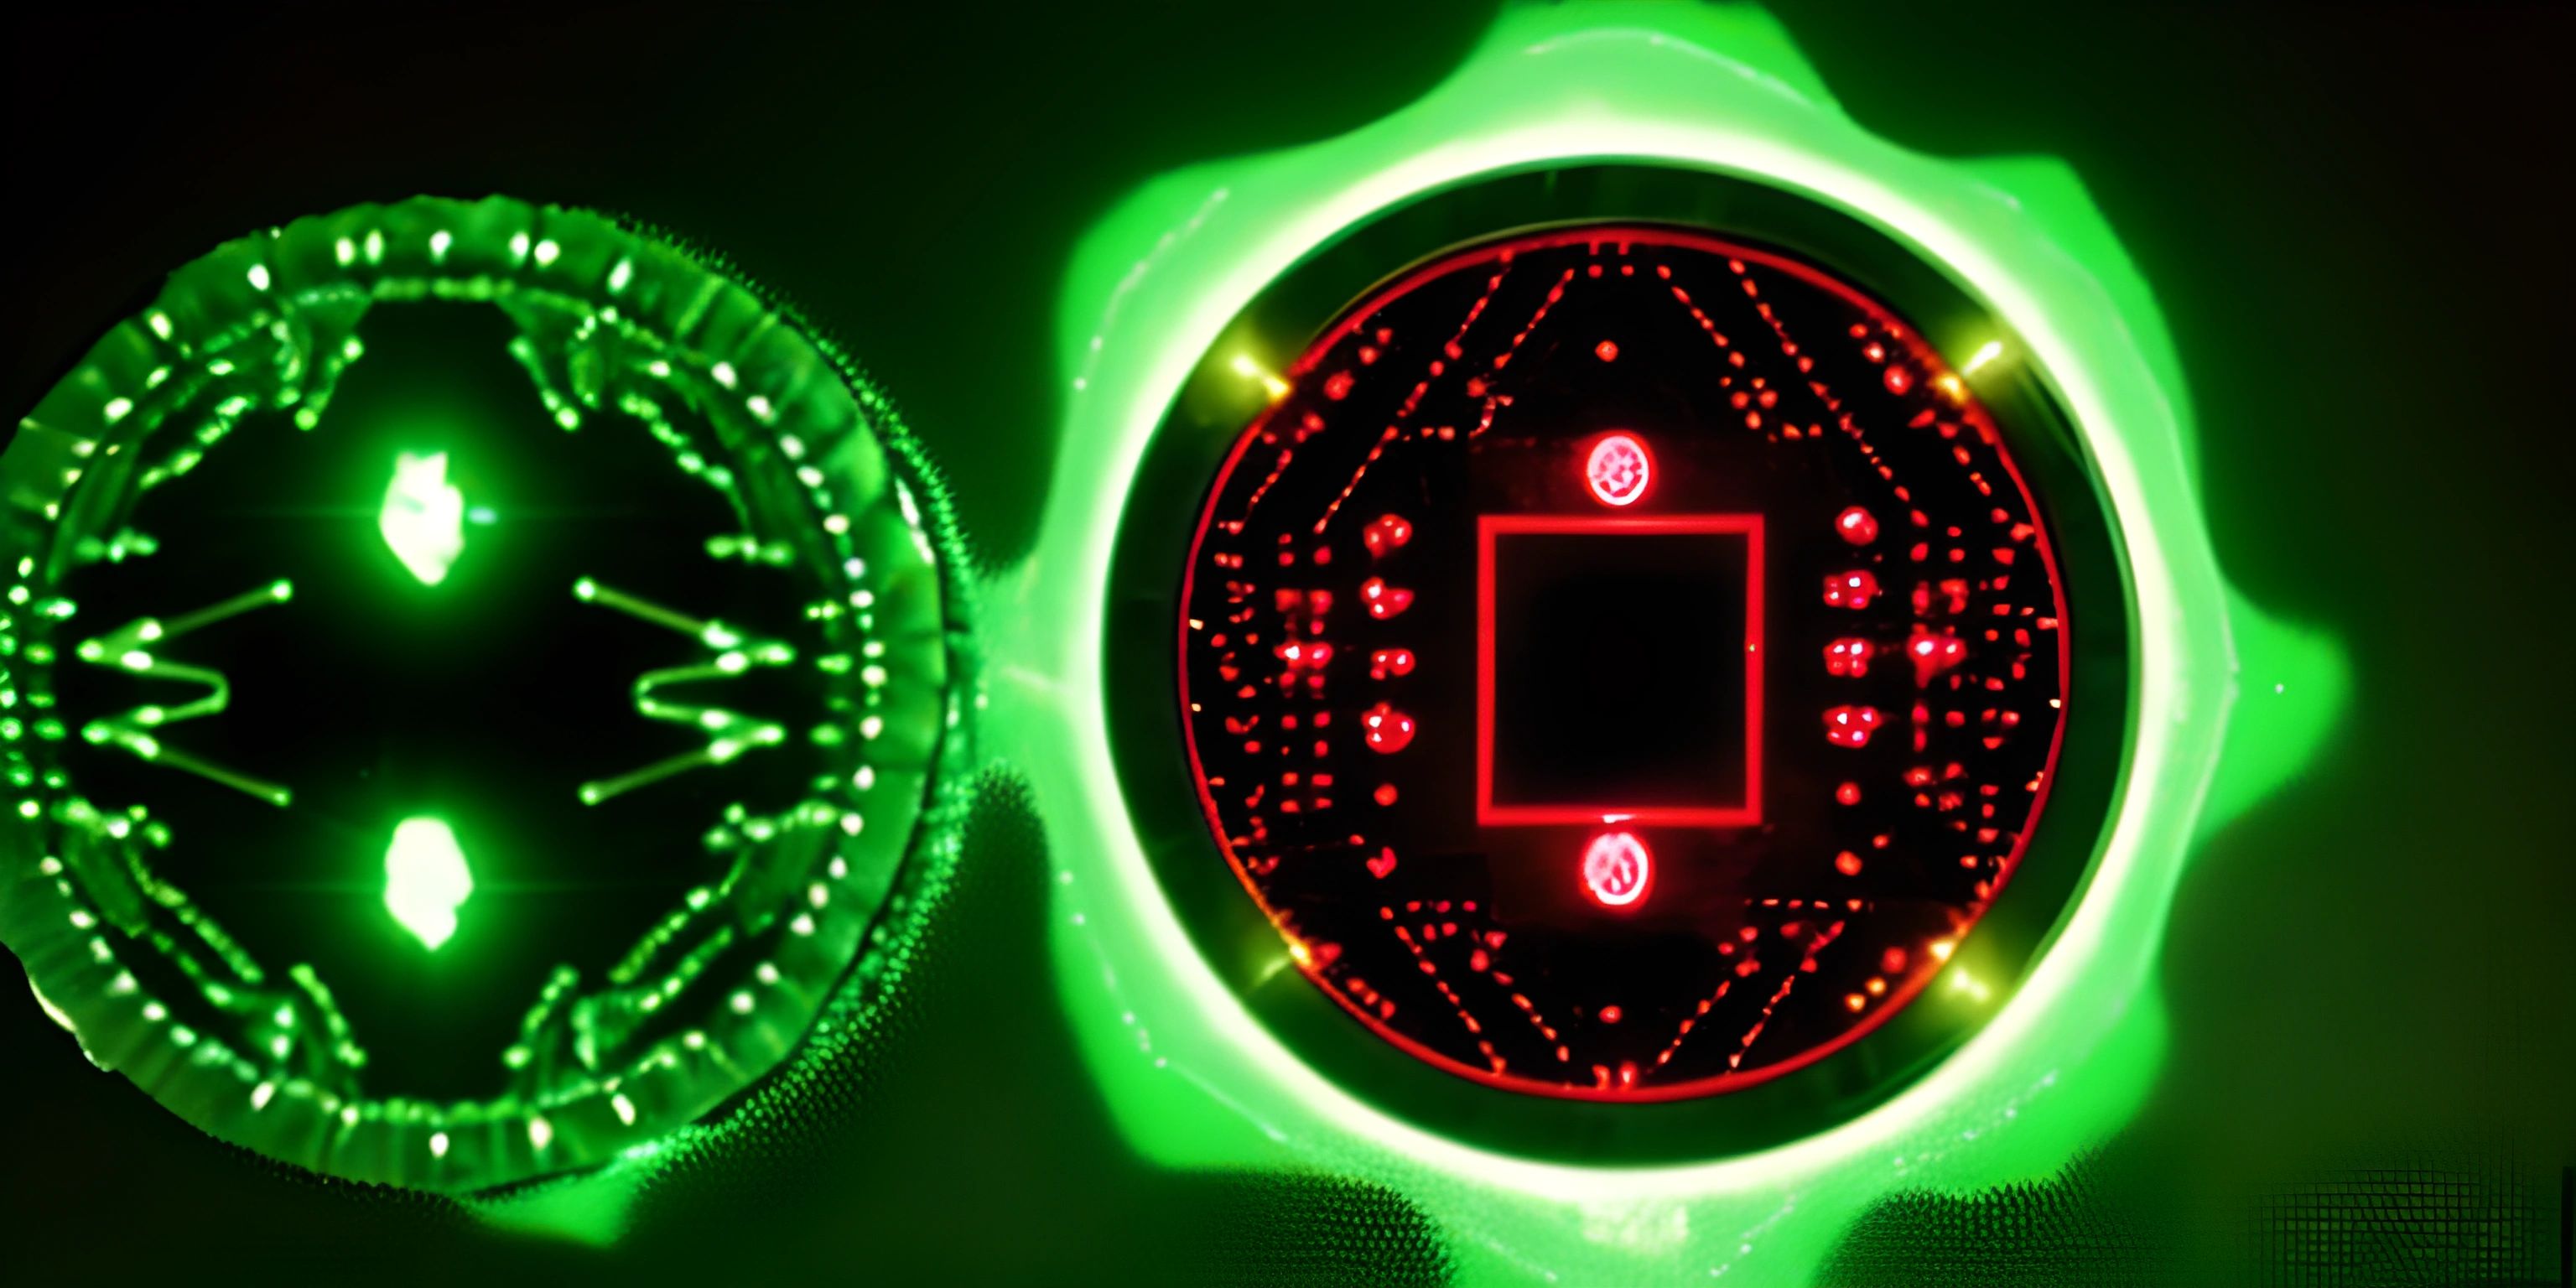 two green illuminated lights and some red circles inlases with white letters on each